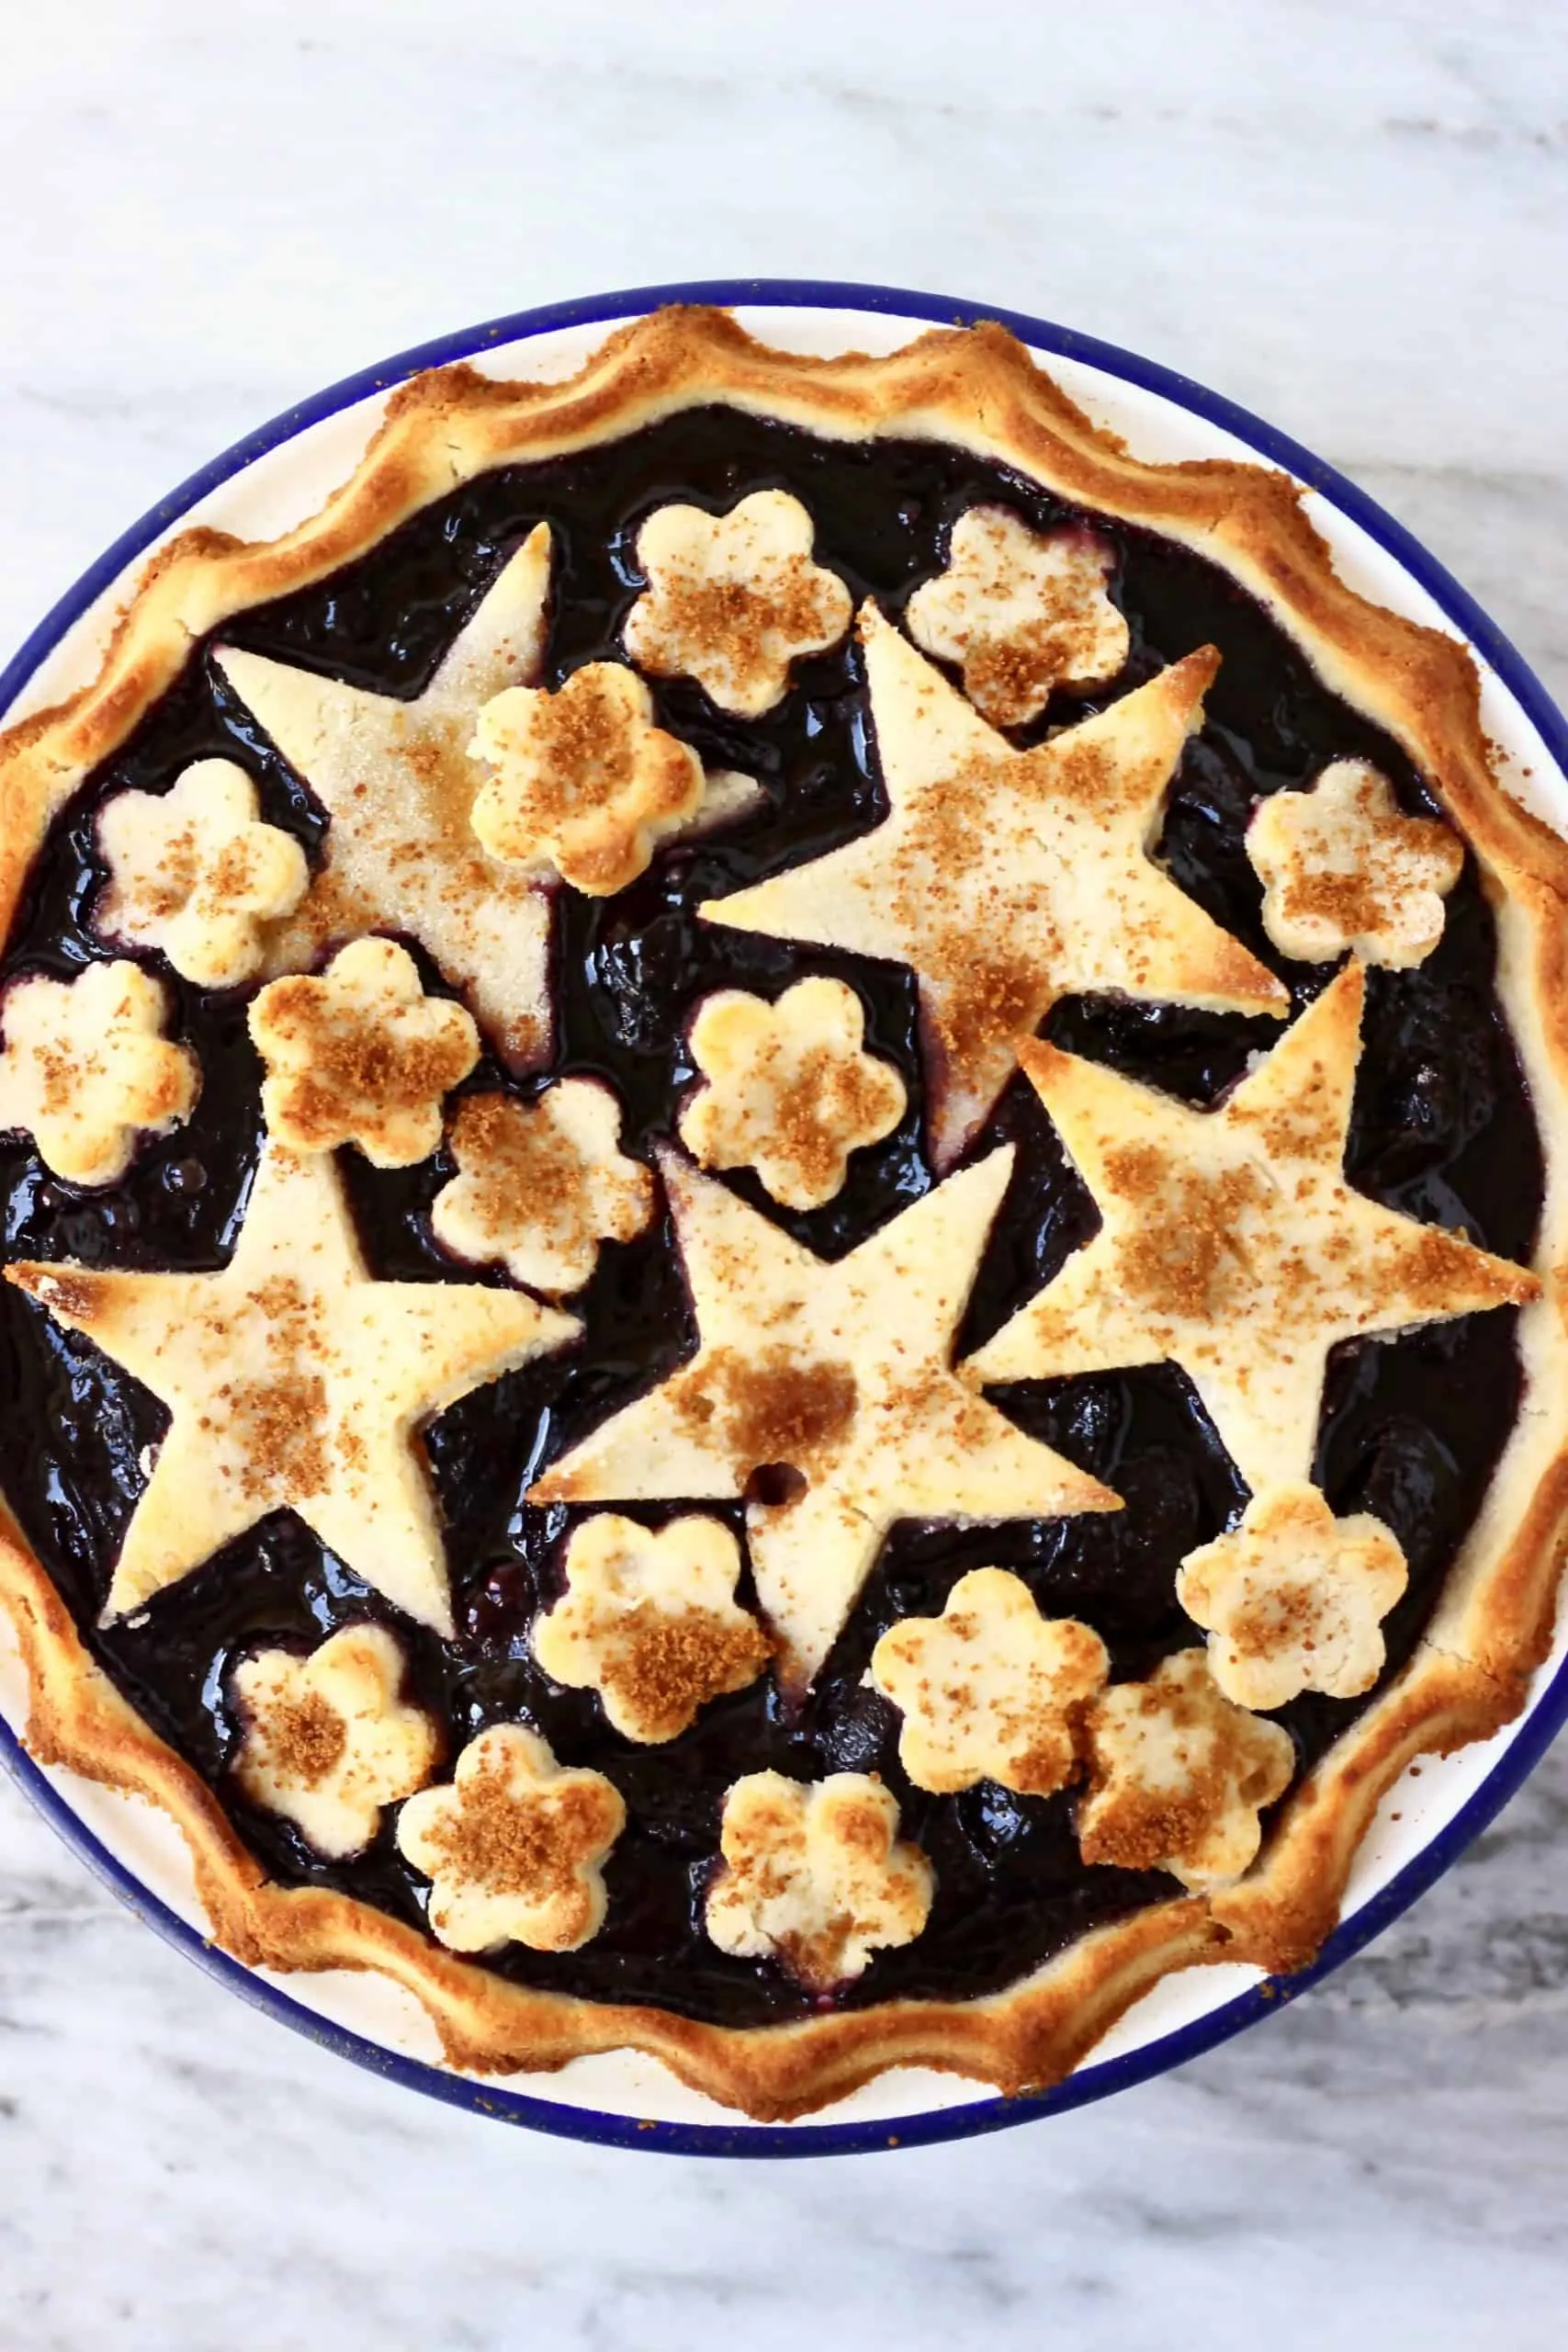 Gluten-free vegan cherry pie topped with pastry stars and flowers in a white pie dish